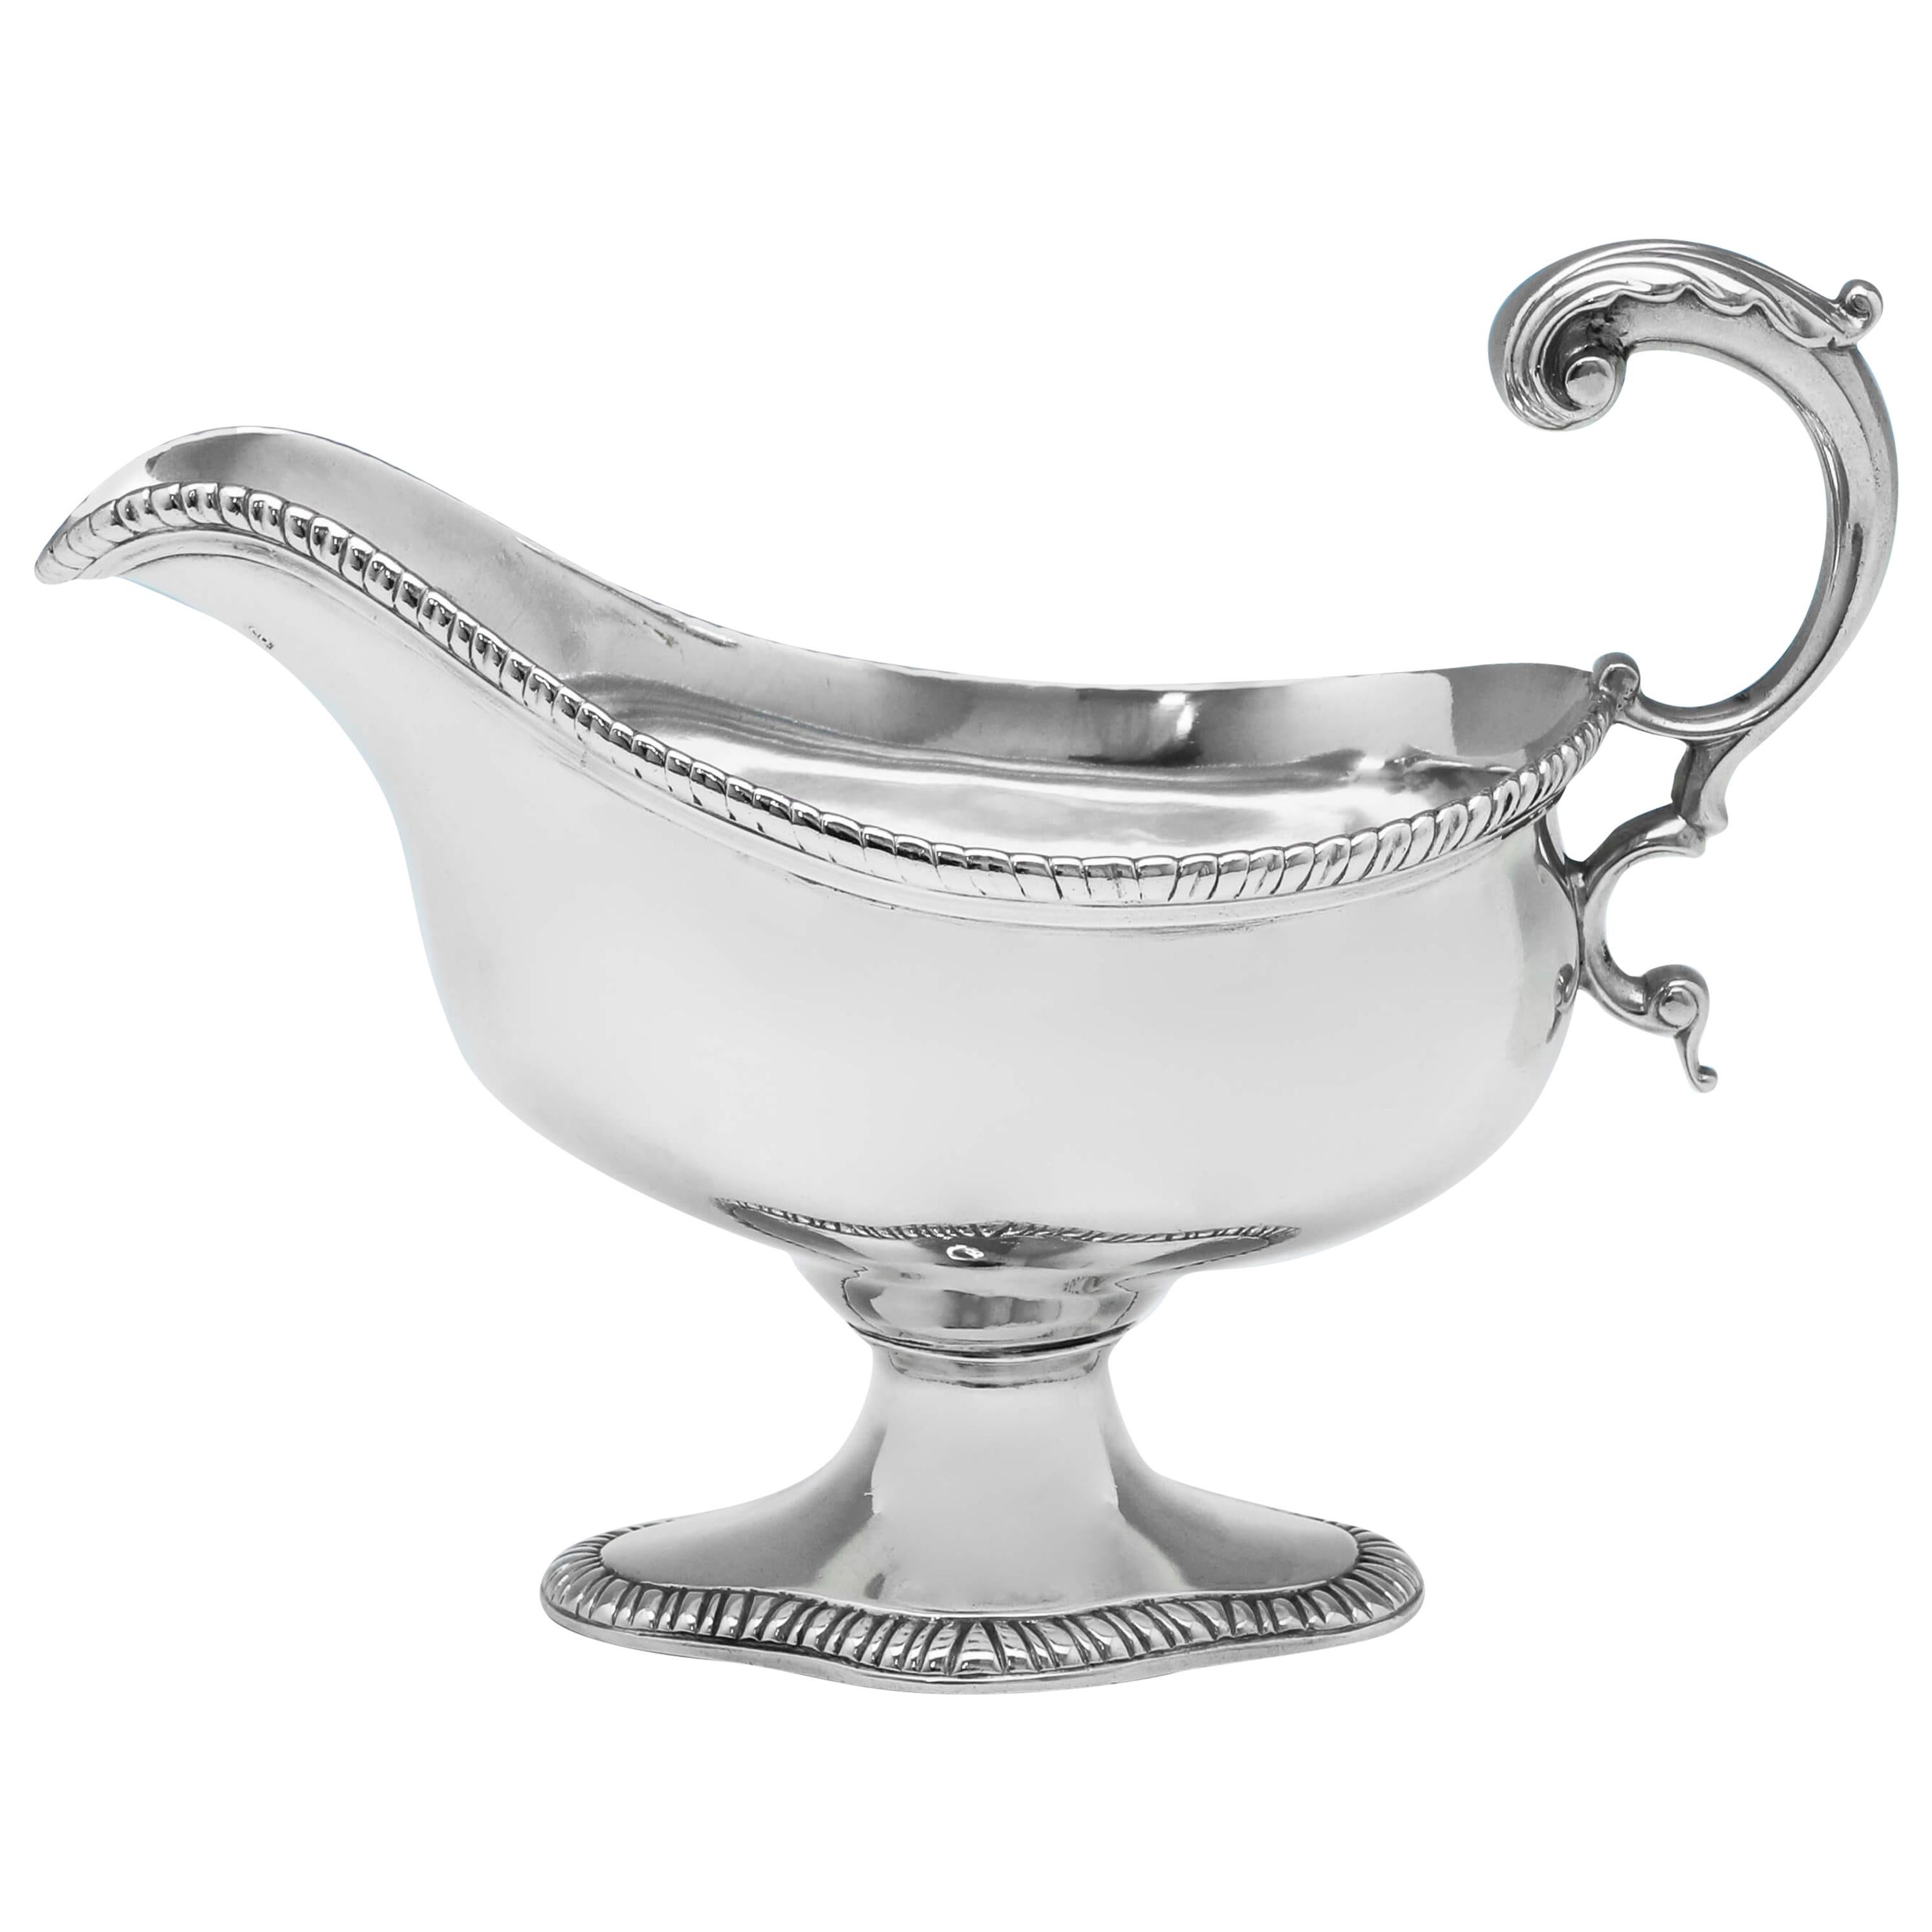 18th Century George III Sterling Silver Sauce Boat Hallmarked in 1780